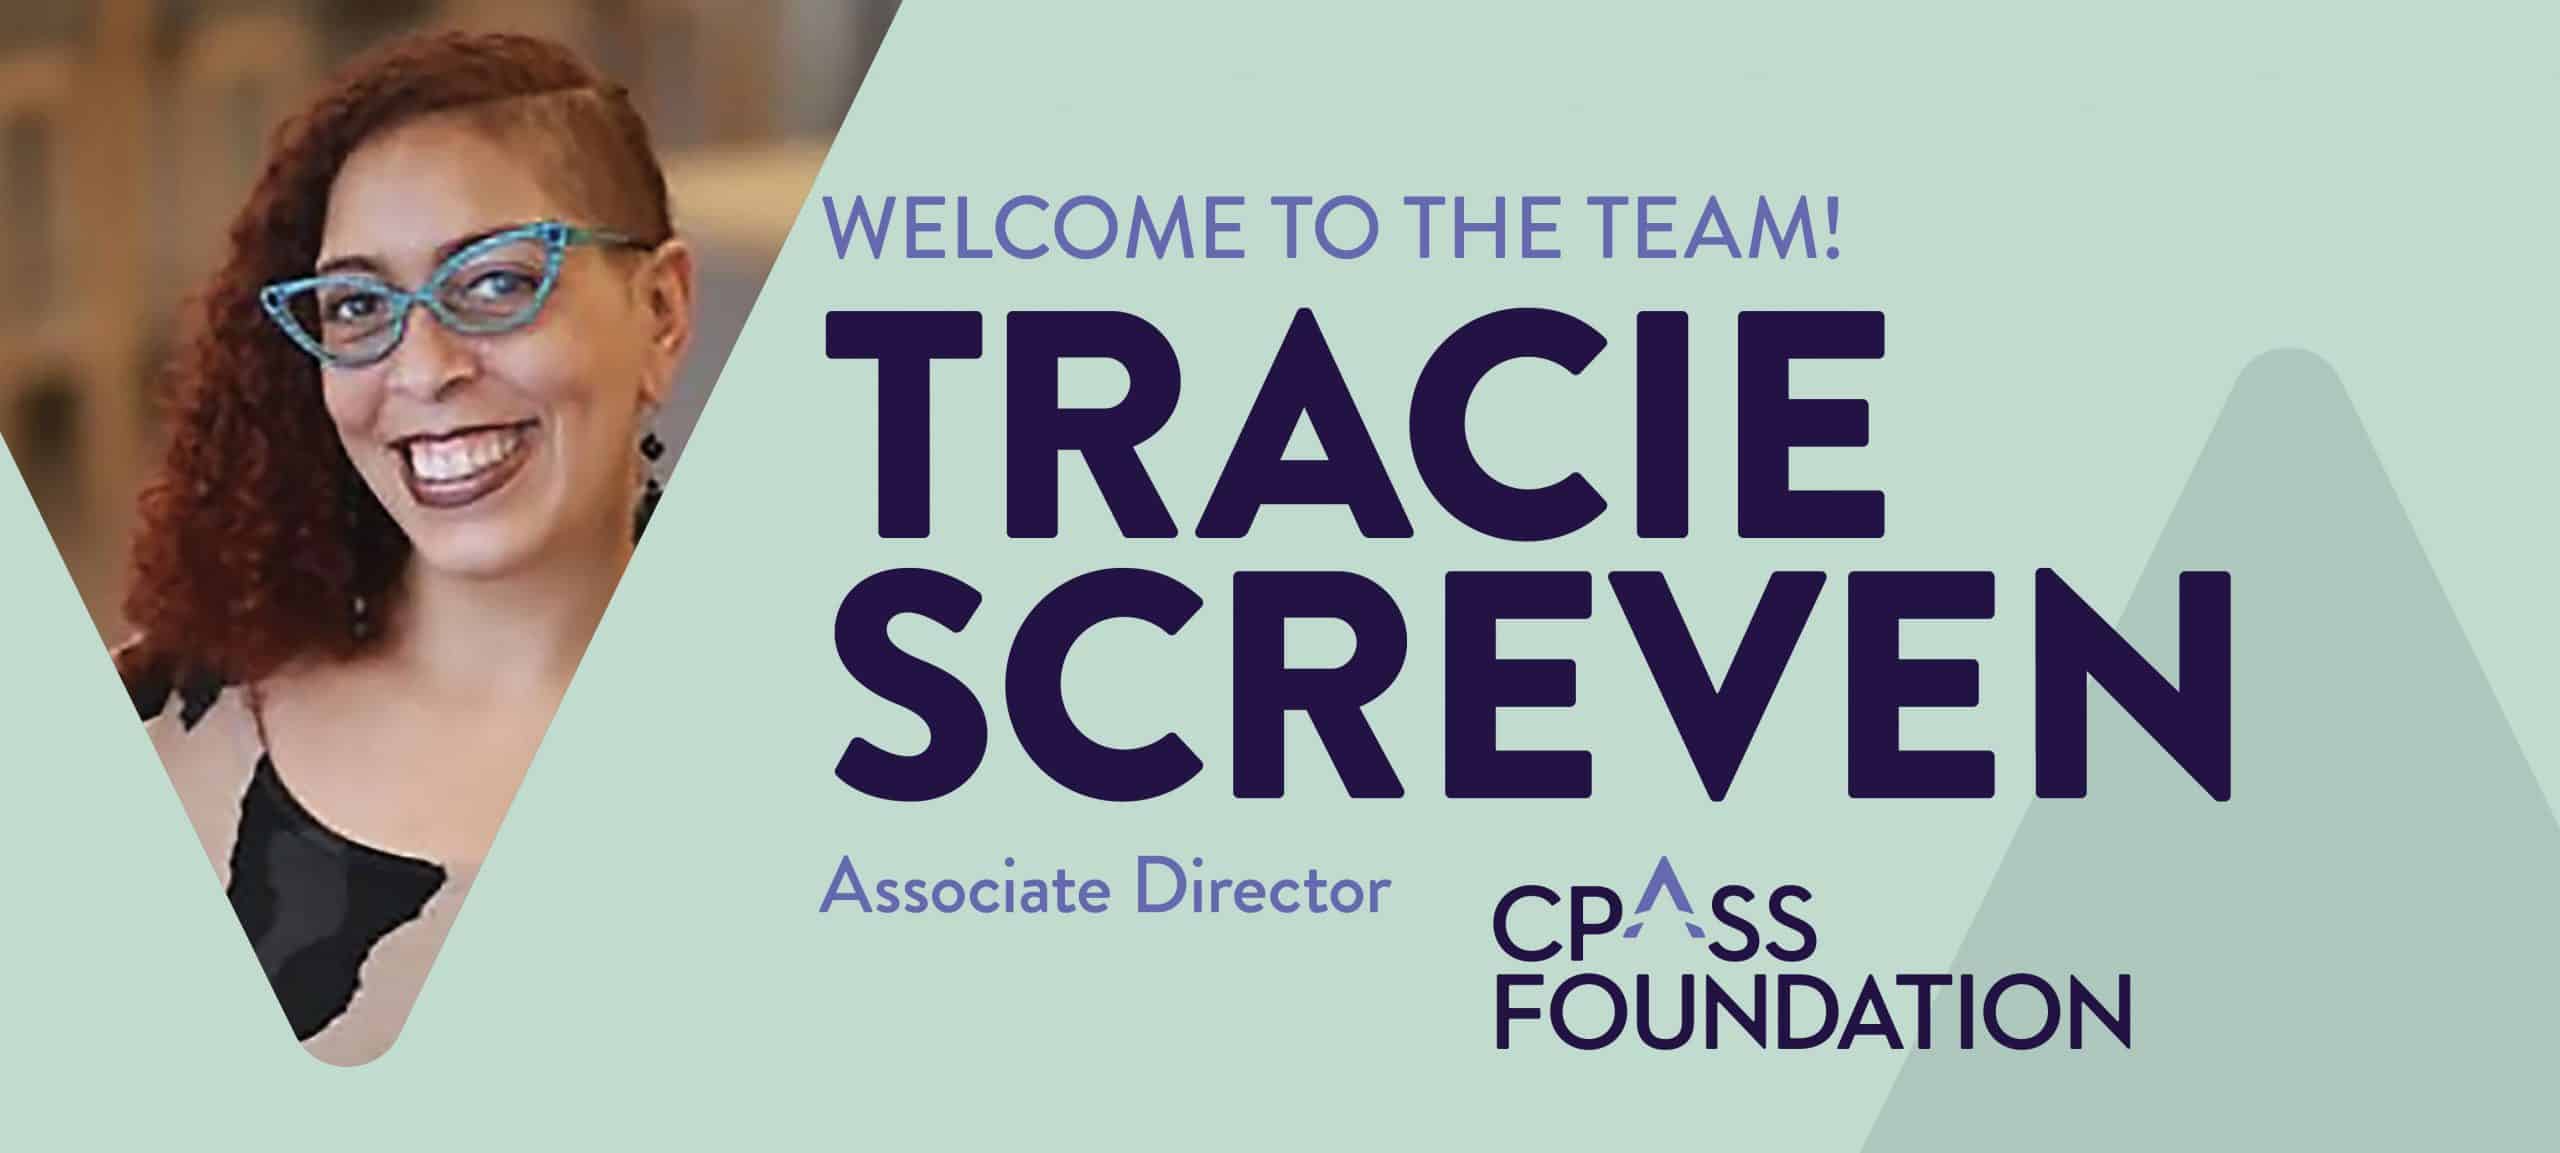 Welcome Tracie Screven as Associate Director for the CPASS Foundation